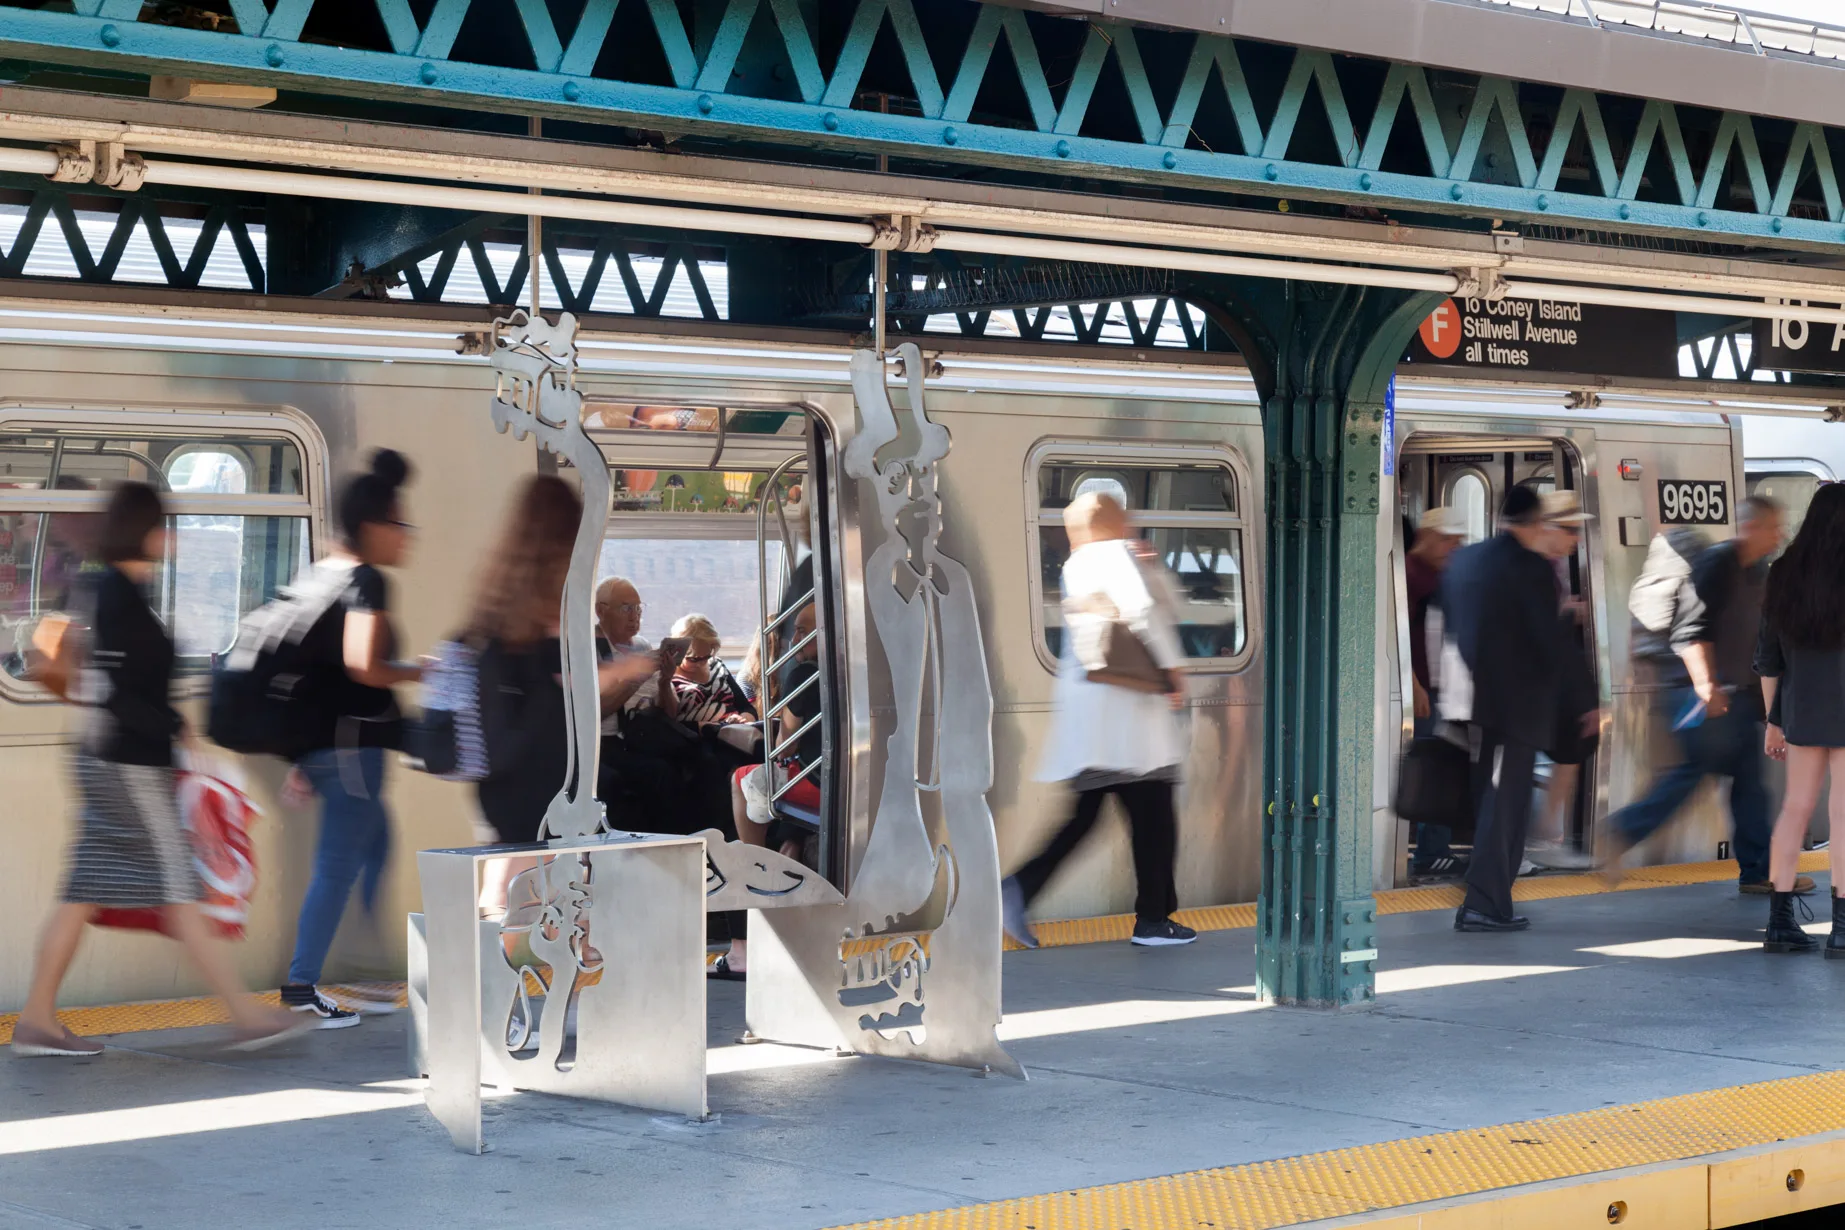 Sculptural bench and windscreen made of a single plate of stainless steel cut along a single line and folded presenting two figures inspired by contemporary and historical figures, in an elevated subway platform in New YOrk